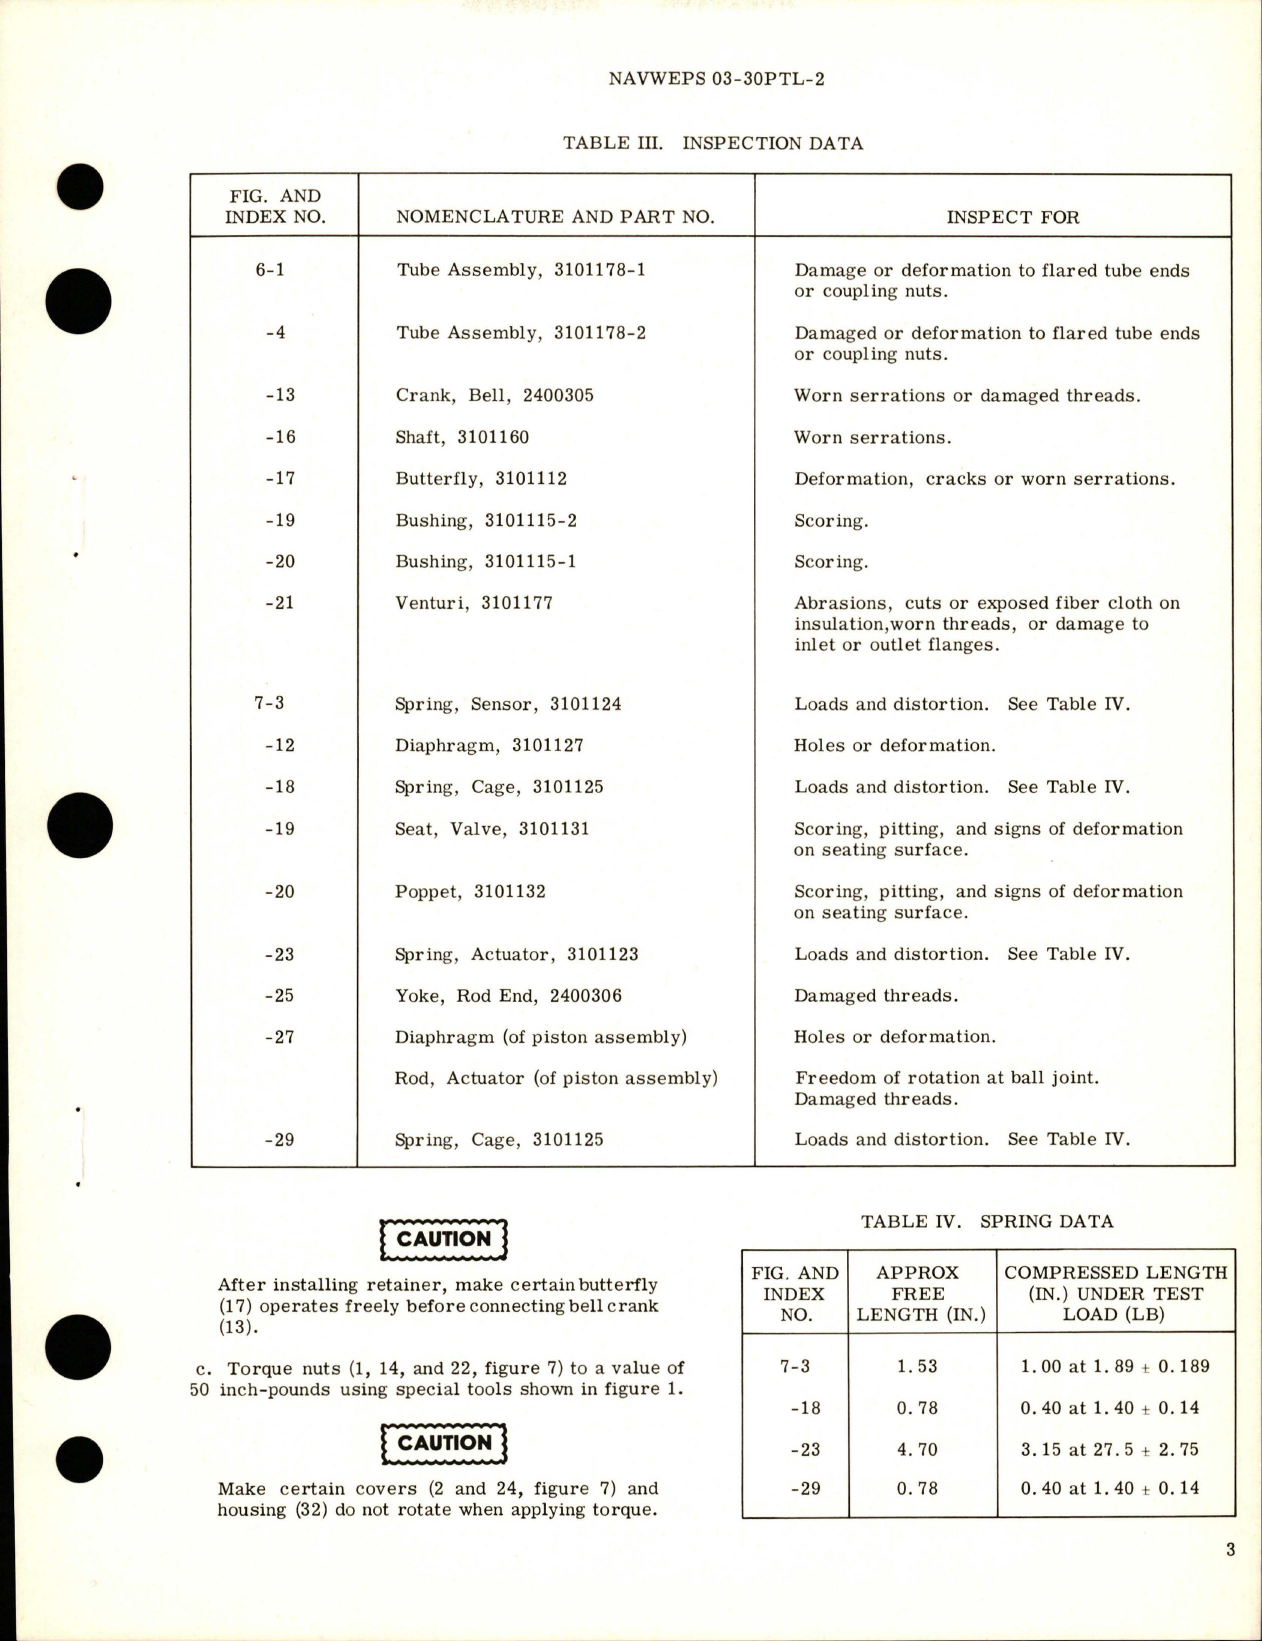 Sample page 5 from AirCorps Library document: Overhaul Instructions with Parts Breakdown for Airflow Limiting Valve - Part 31011-1